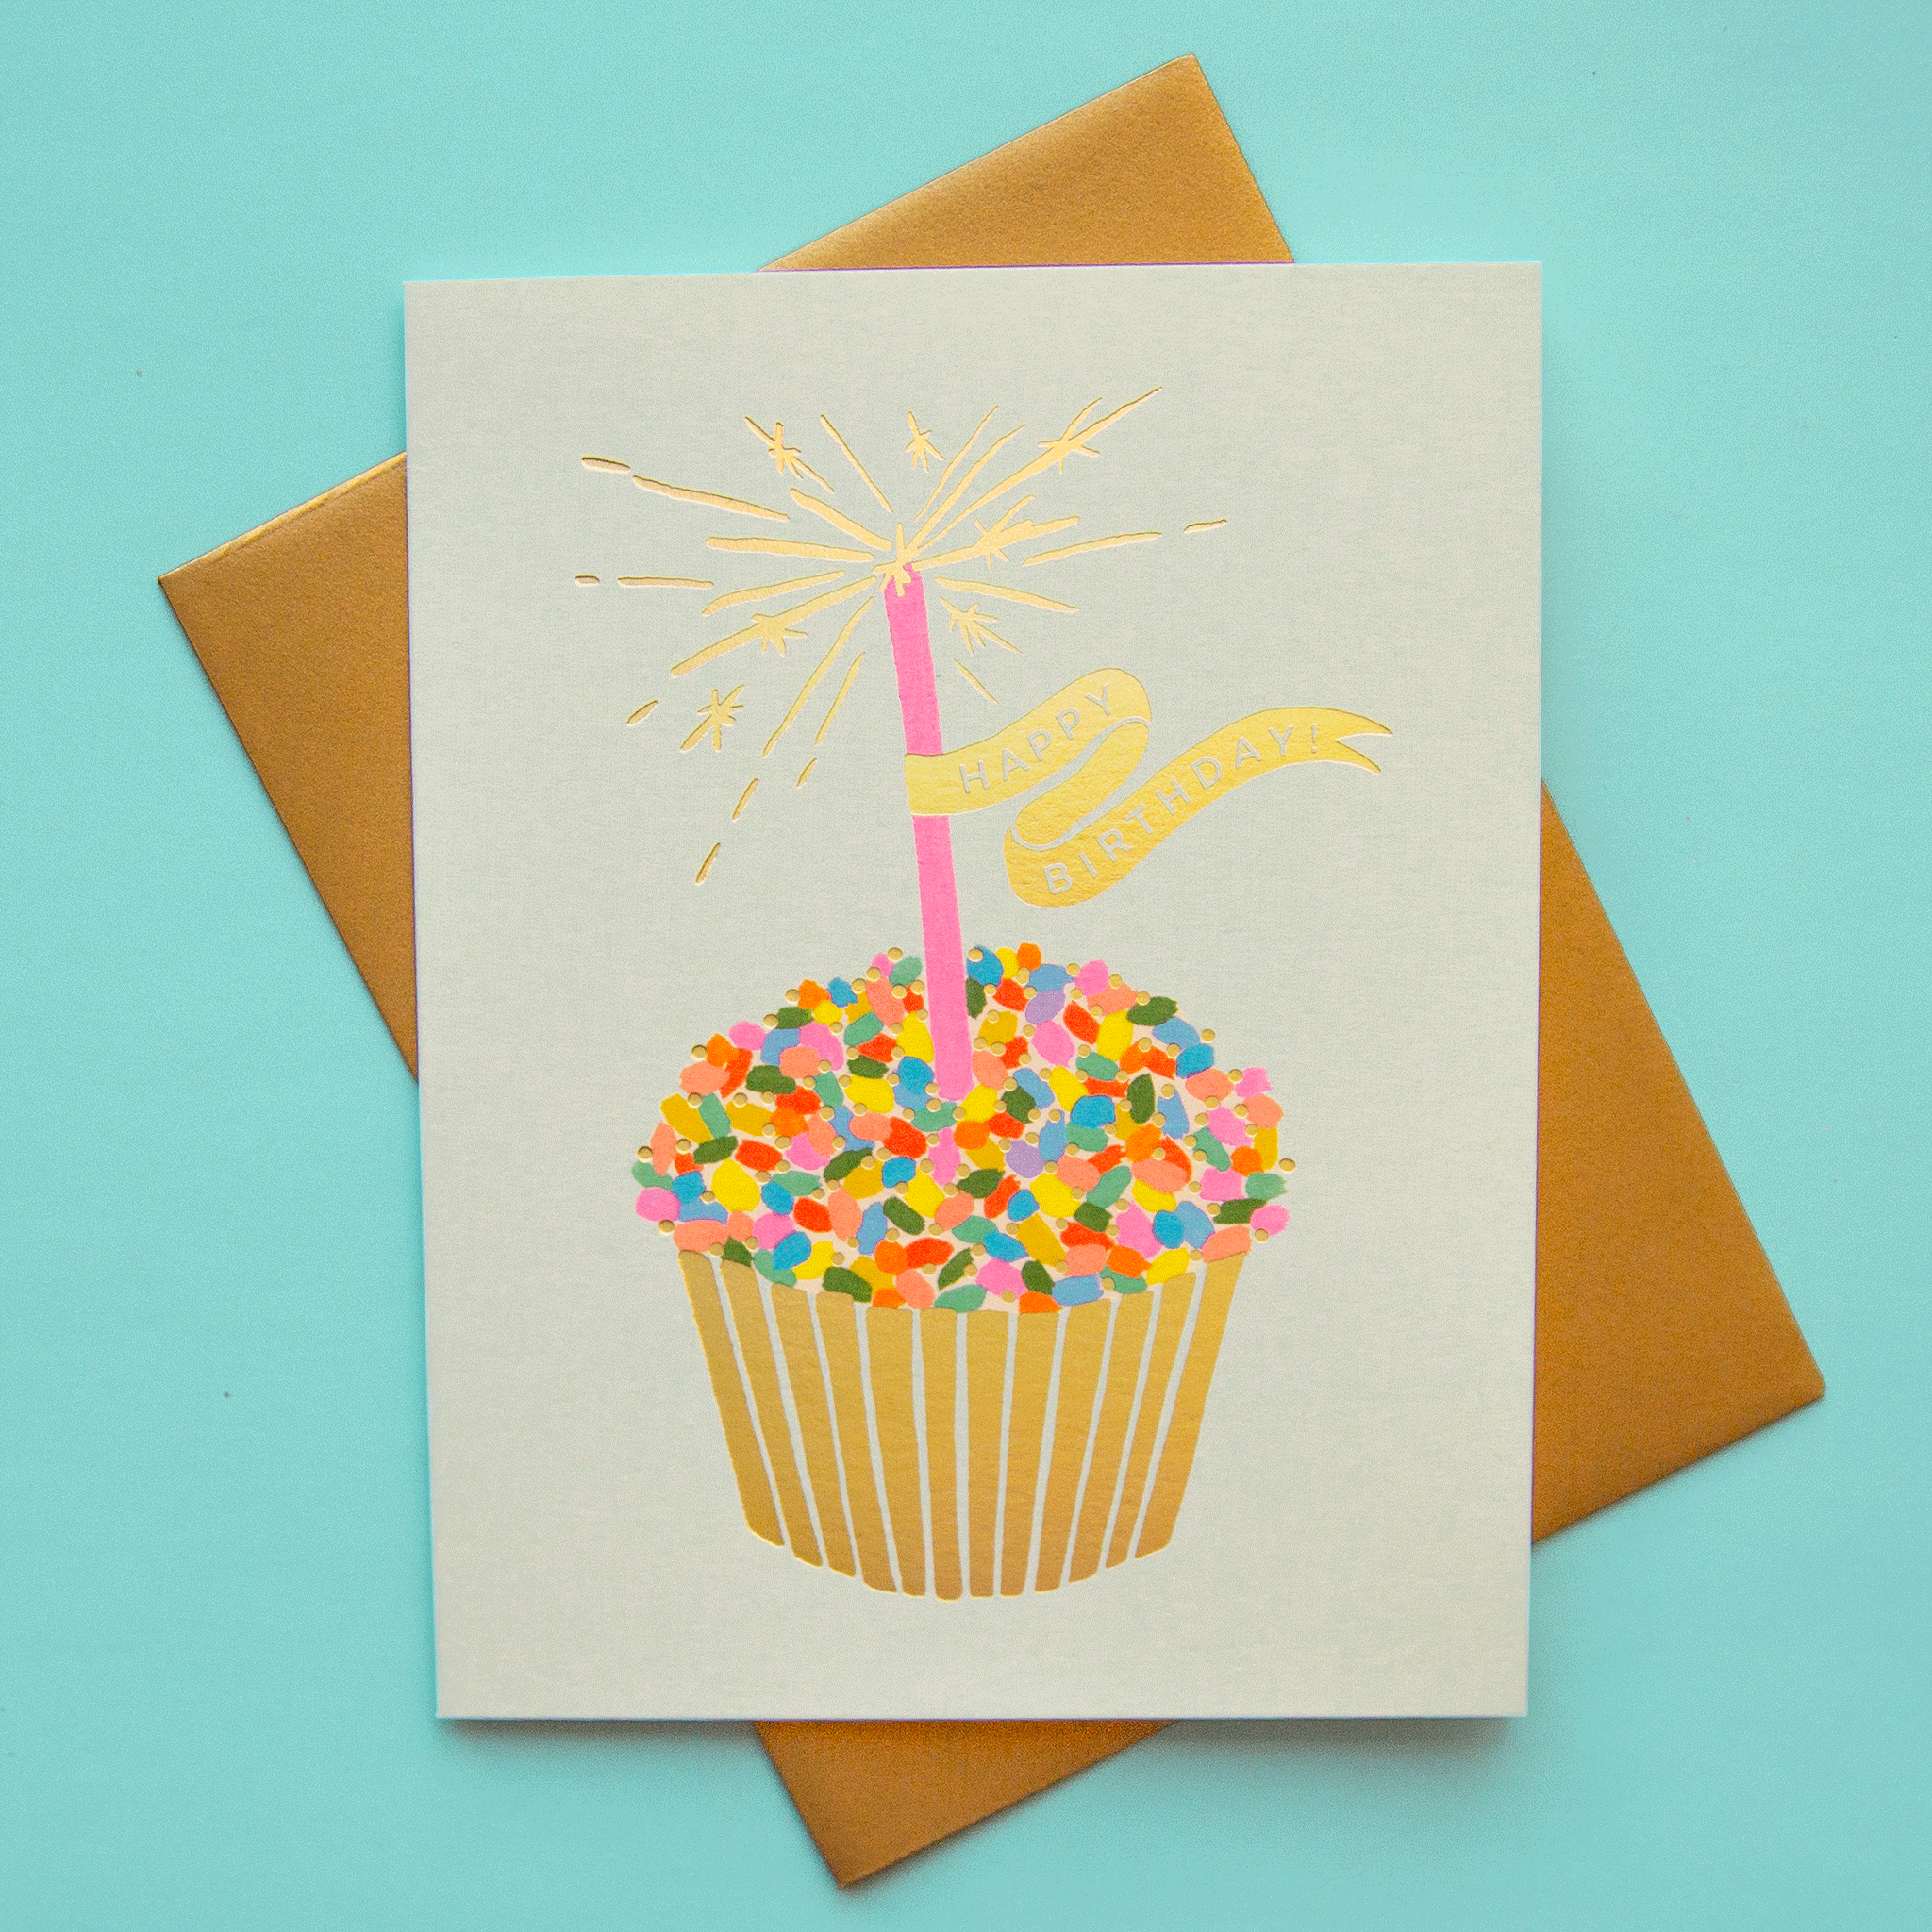 A cupcake birthday card with brown envelope - rainbow cupcake, with sparkling candle print, happy birthday text.